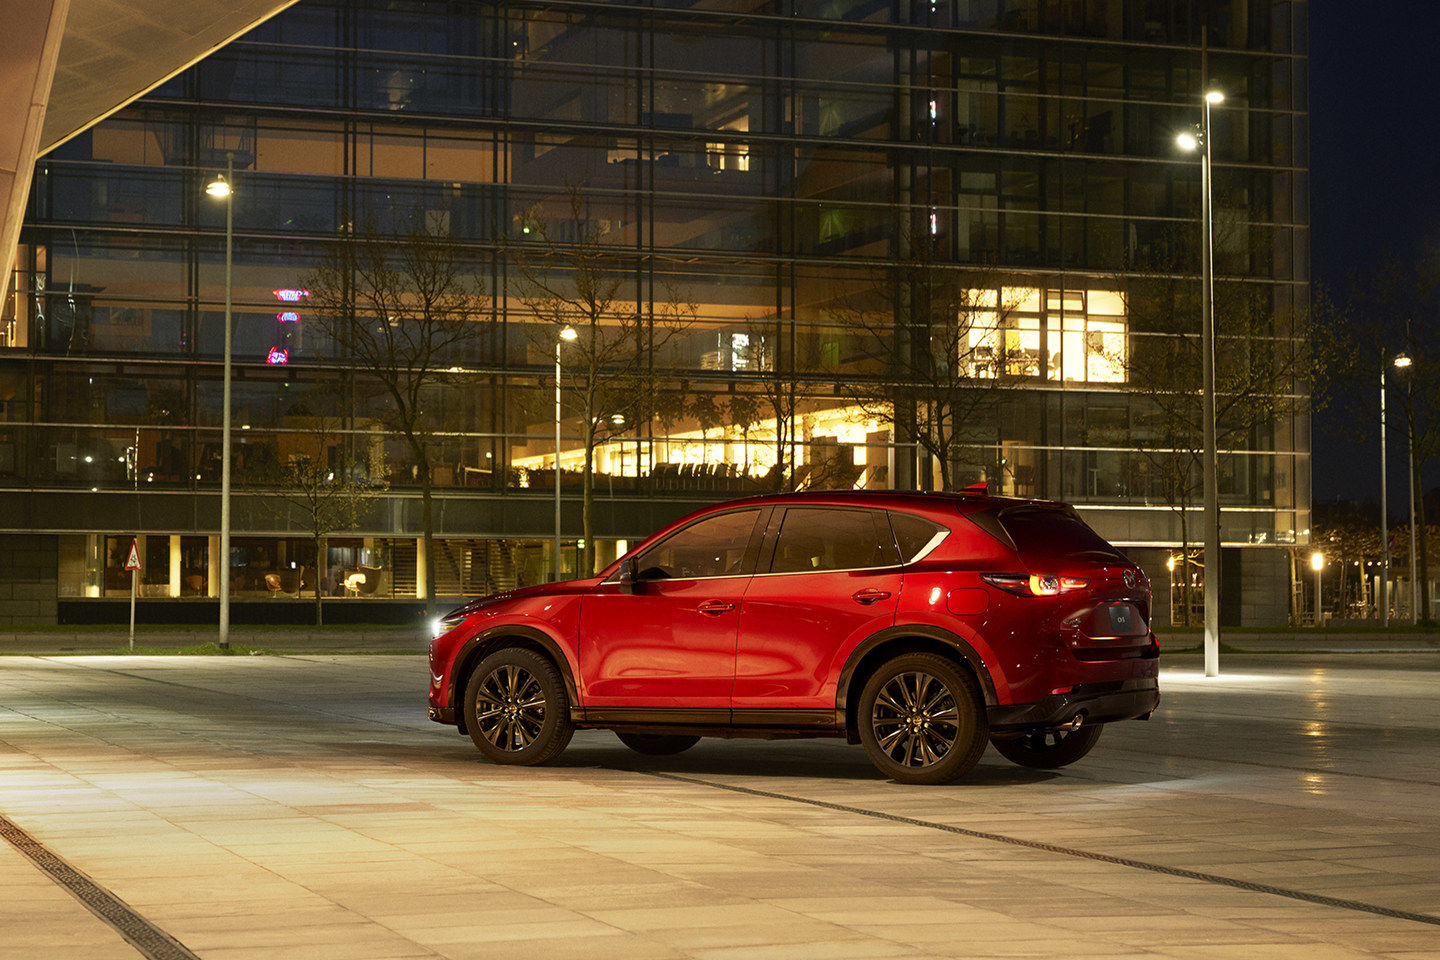 2023 Mazda CX-5 - Here’s What You Need to Know